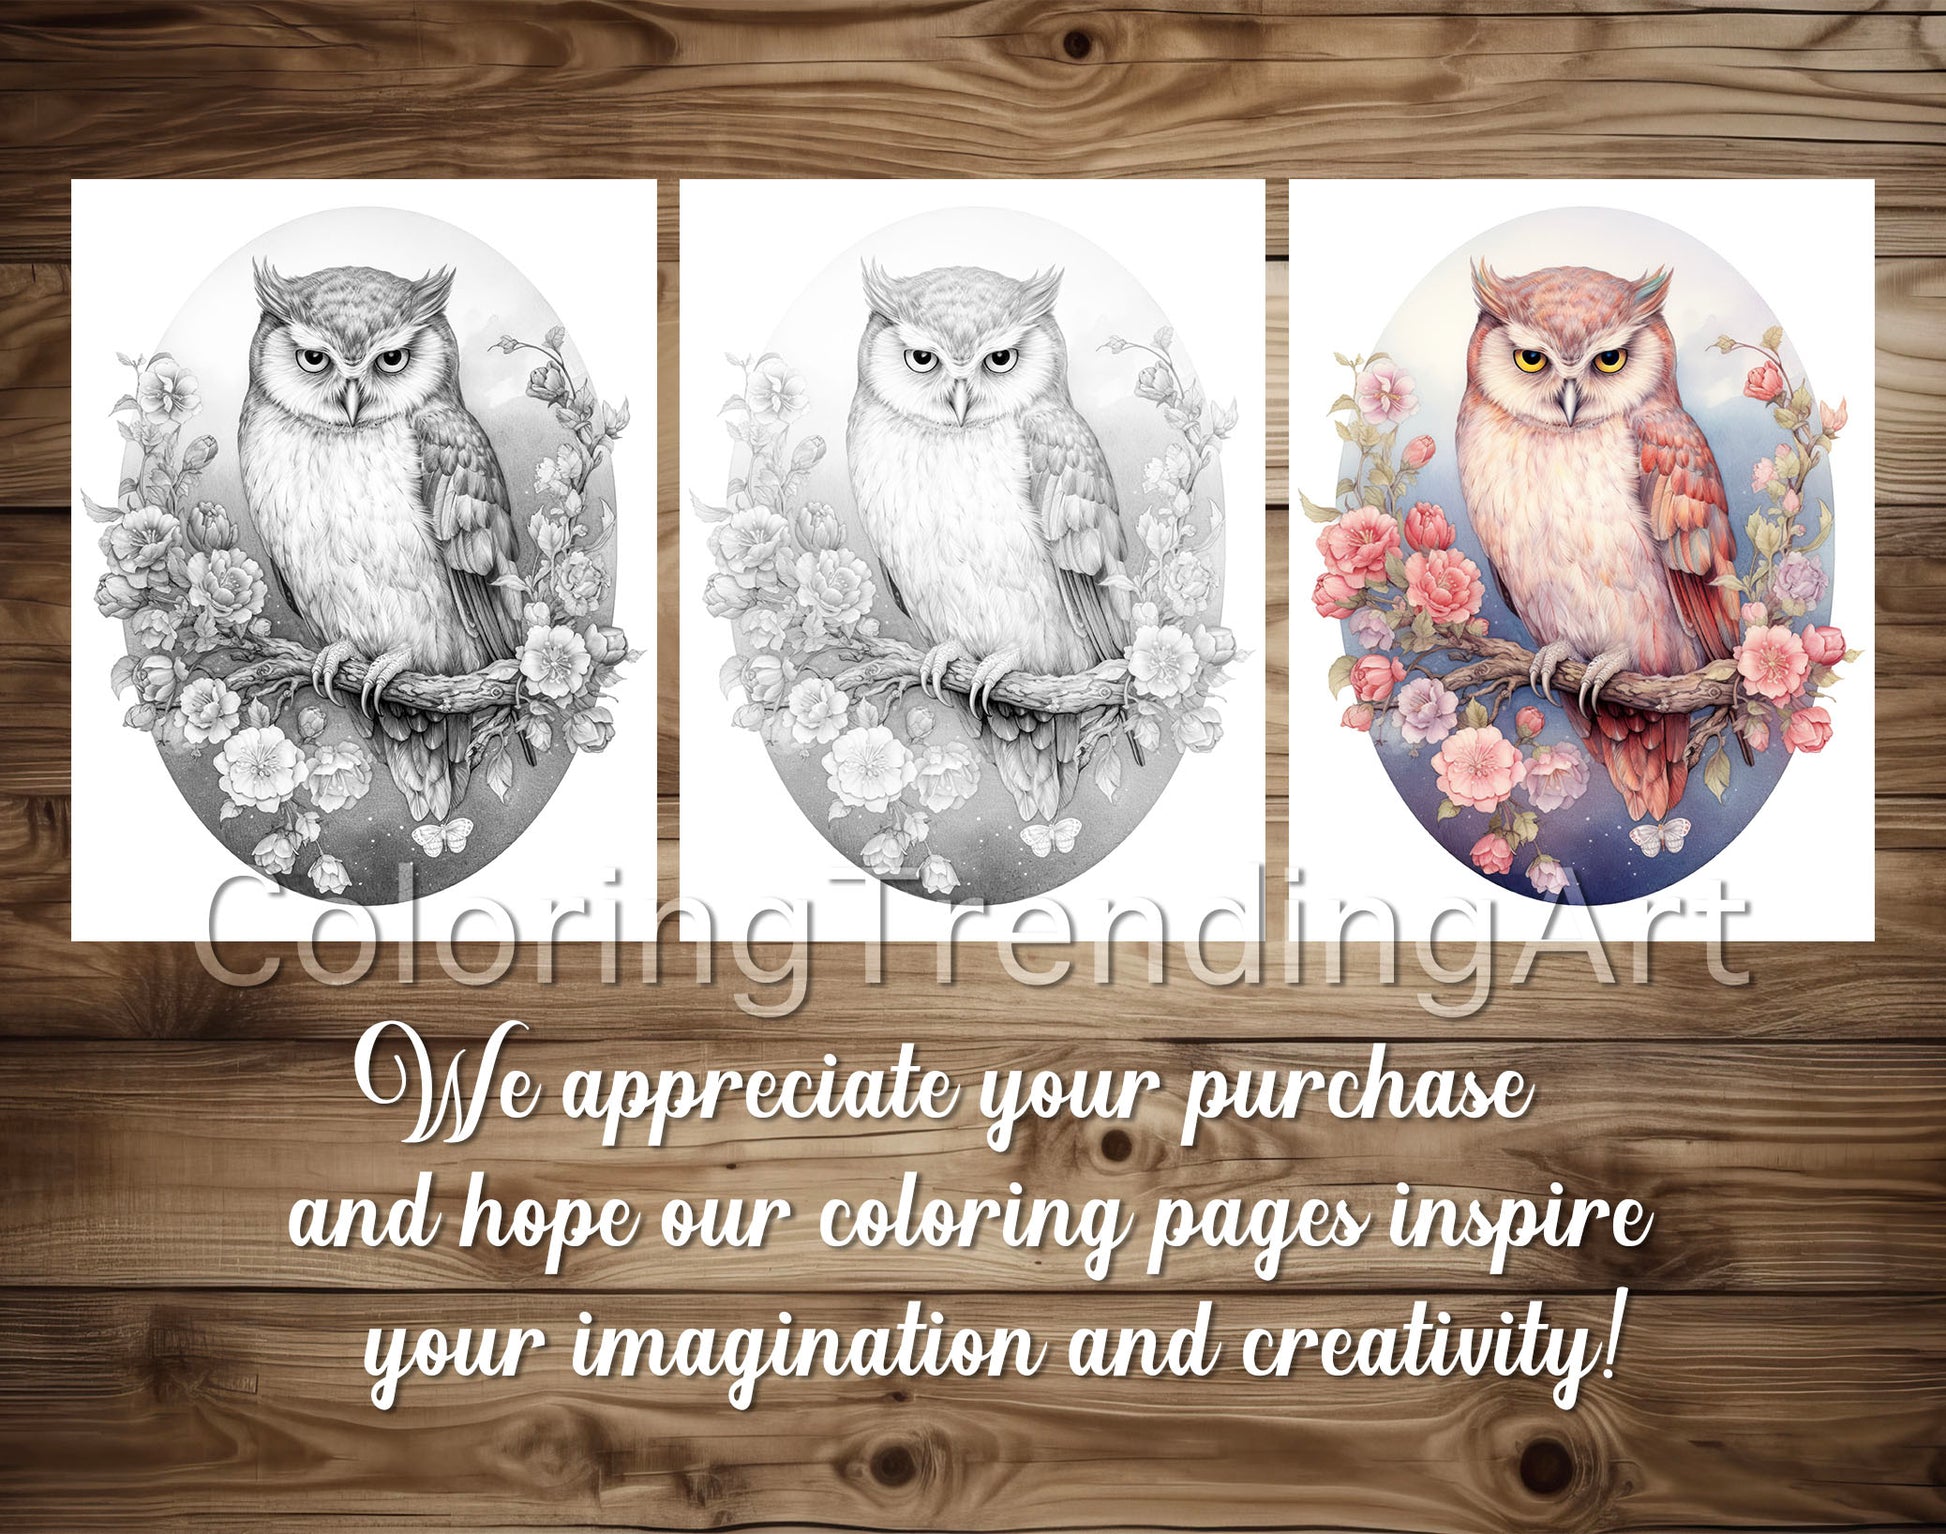 25 Adorable Flower Owls Grayscale Coloring Pages for Adults, Kids, Instant Download, Dark/Light Illustration PDF - TrendingColoring